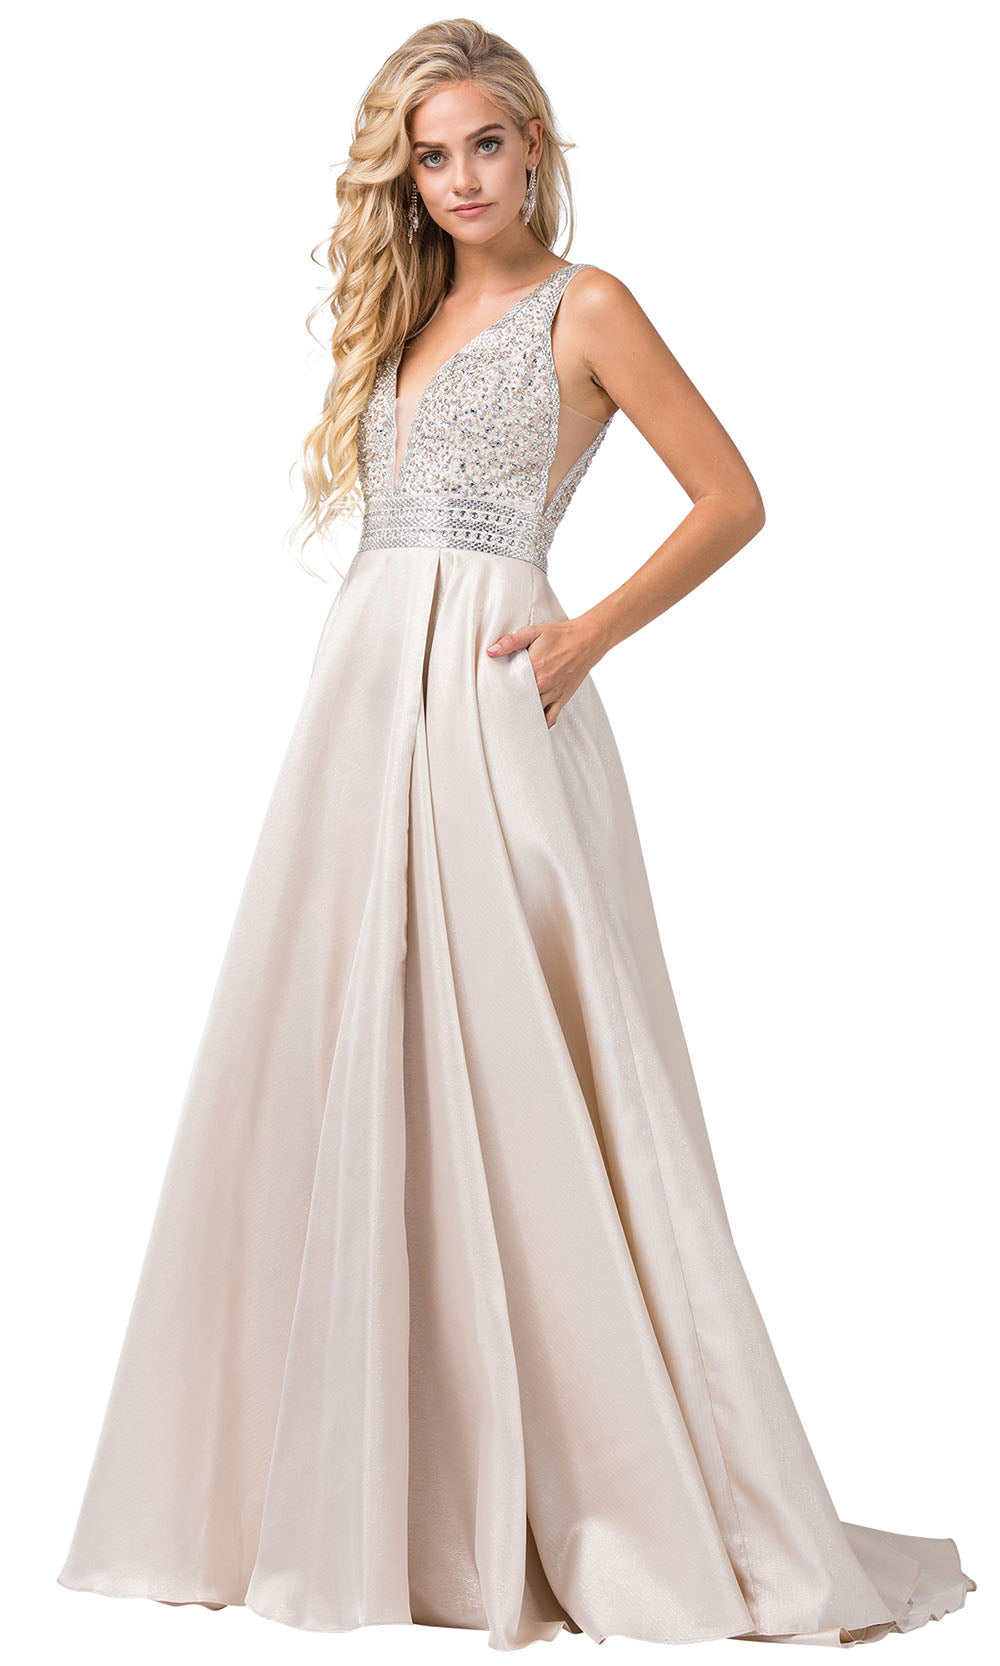 Dancing Queen - 2748 Deep Neck Beaded Shiny Gown In Silver and Neutral